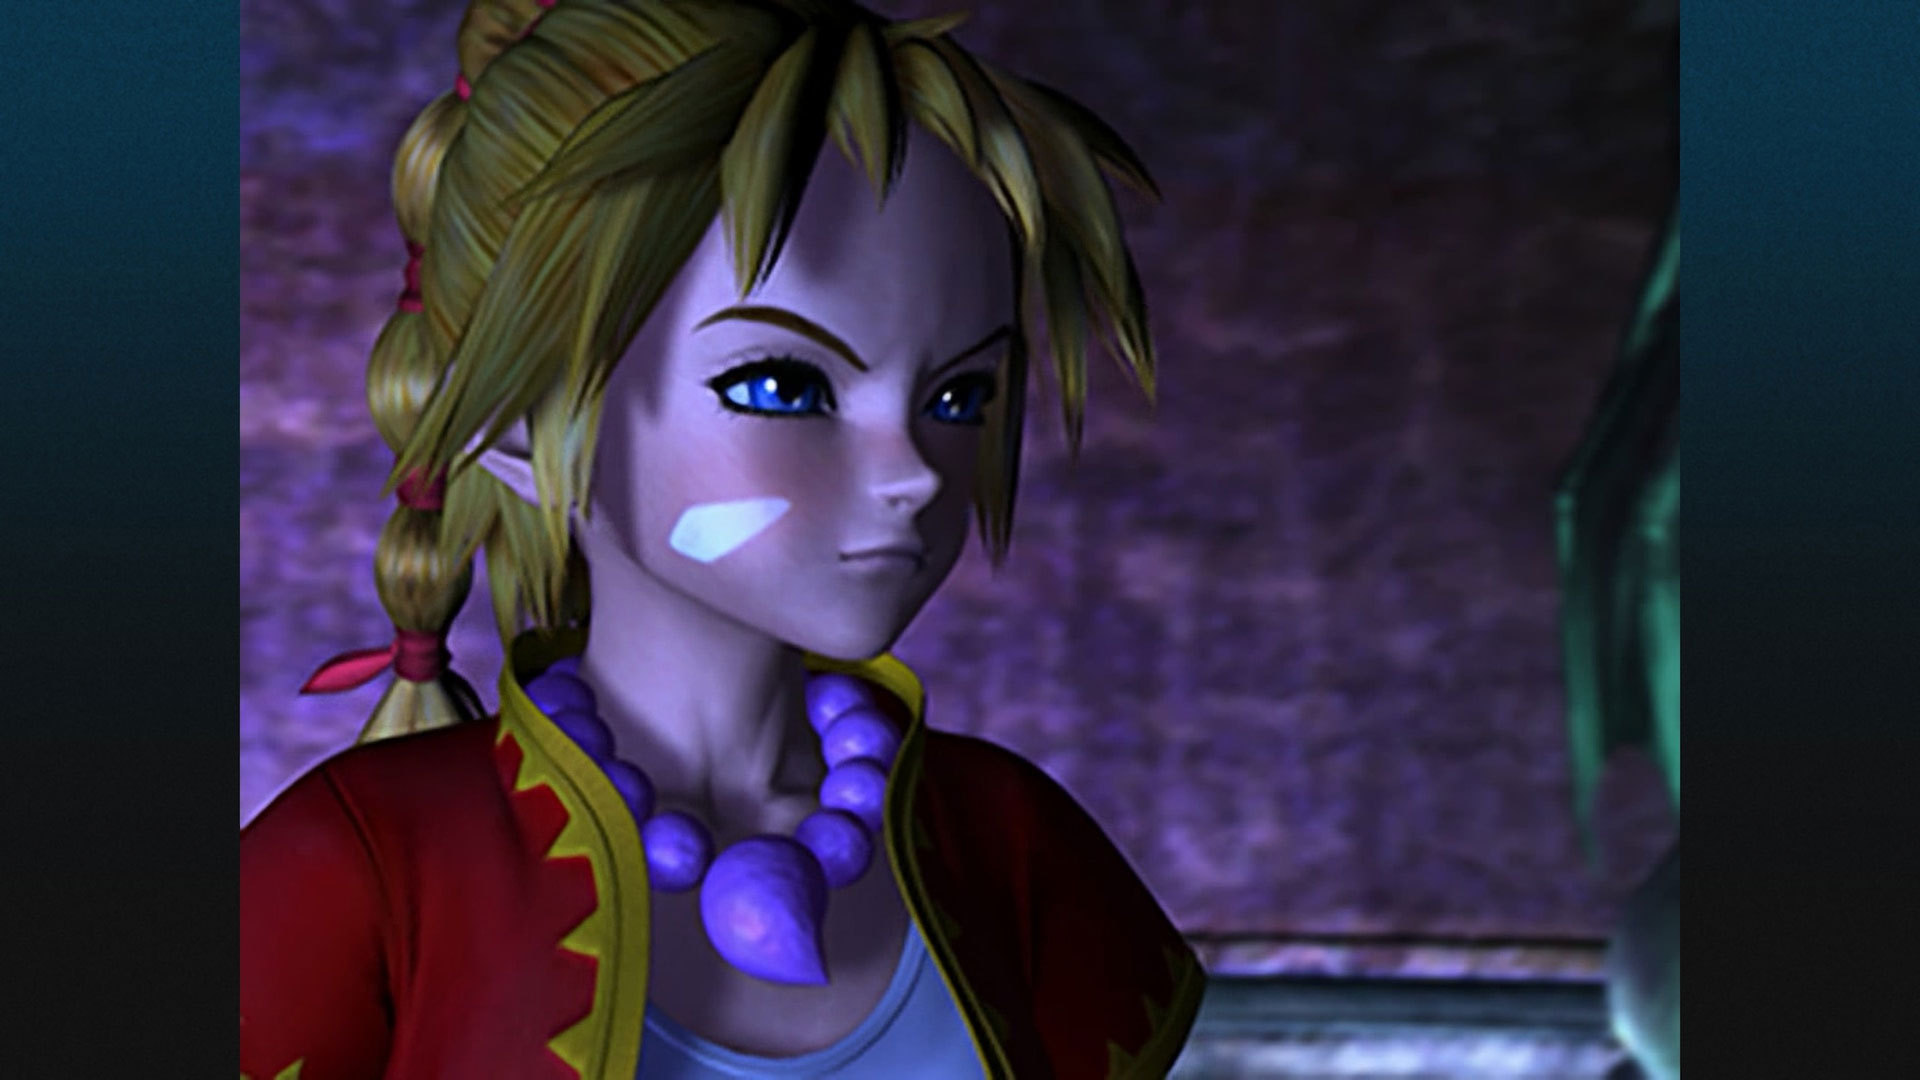 Review  Chrono Cross: The Radical Dreamers Edition - NintendoBoy